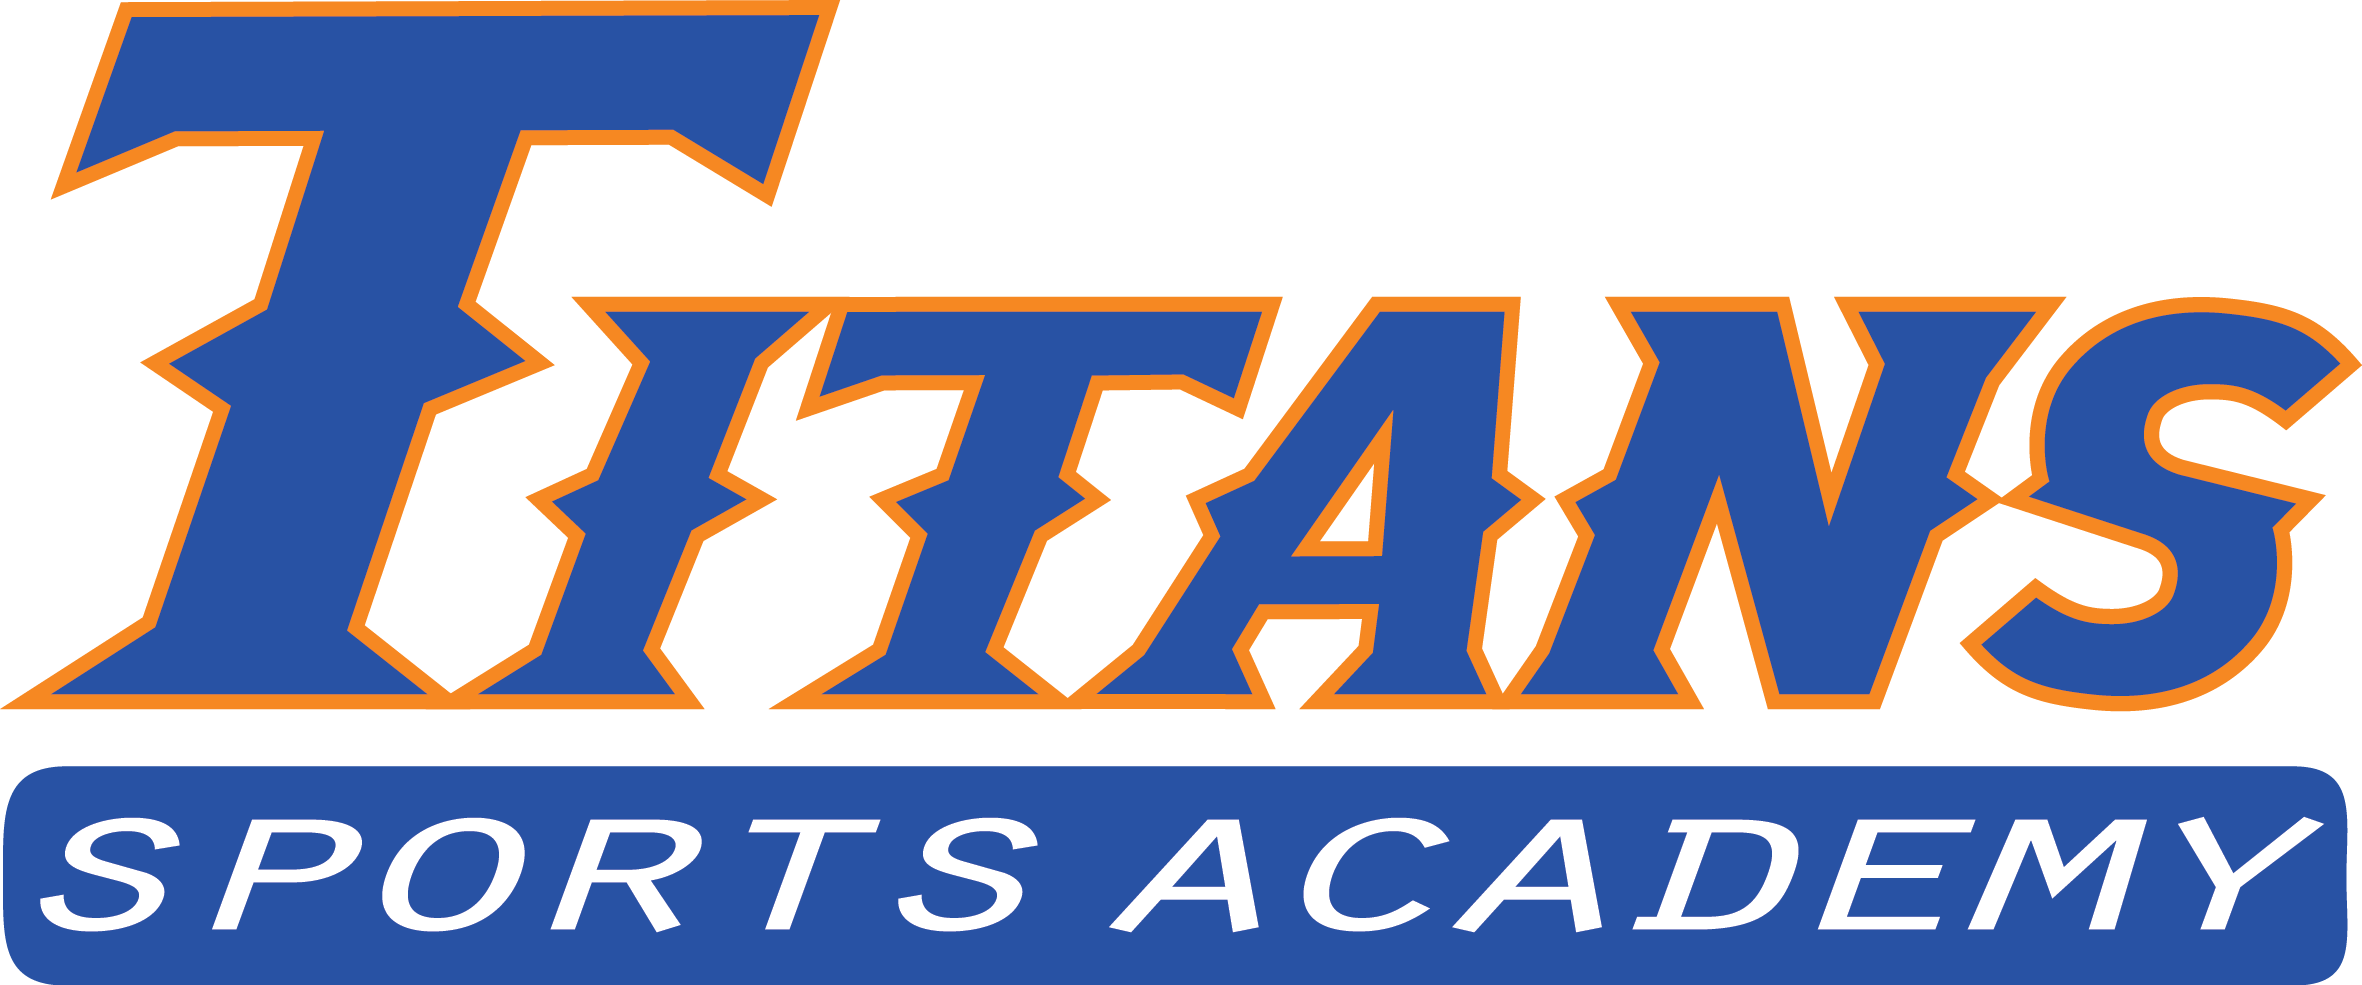 Titans_Sportsacademy_Logo.png